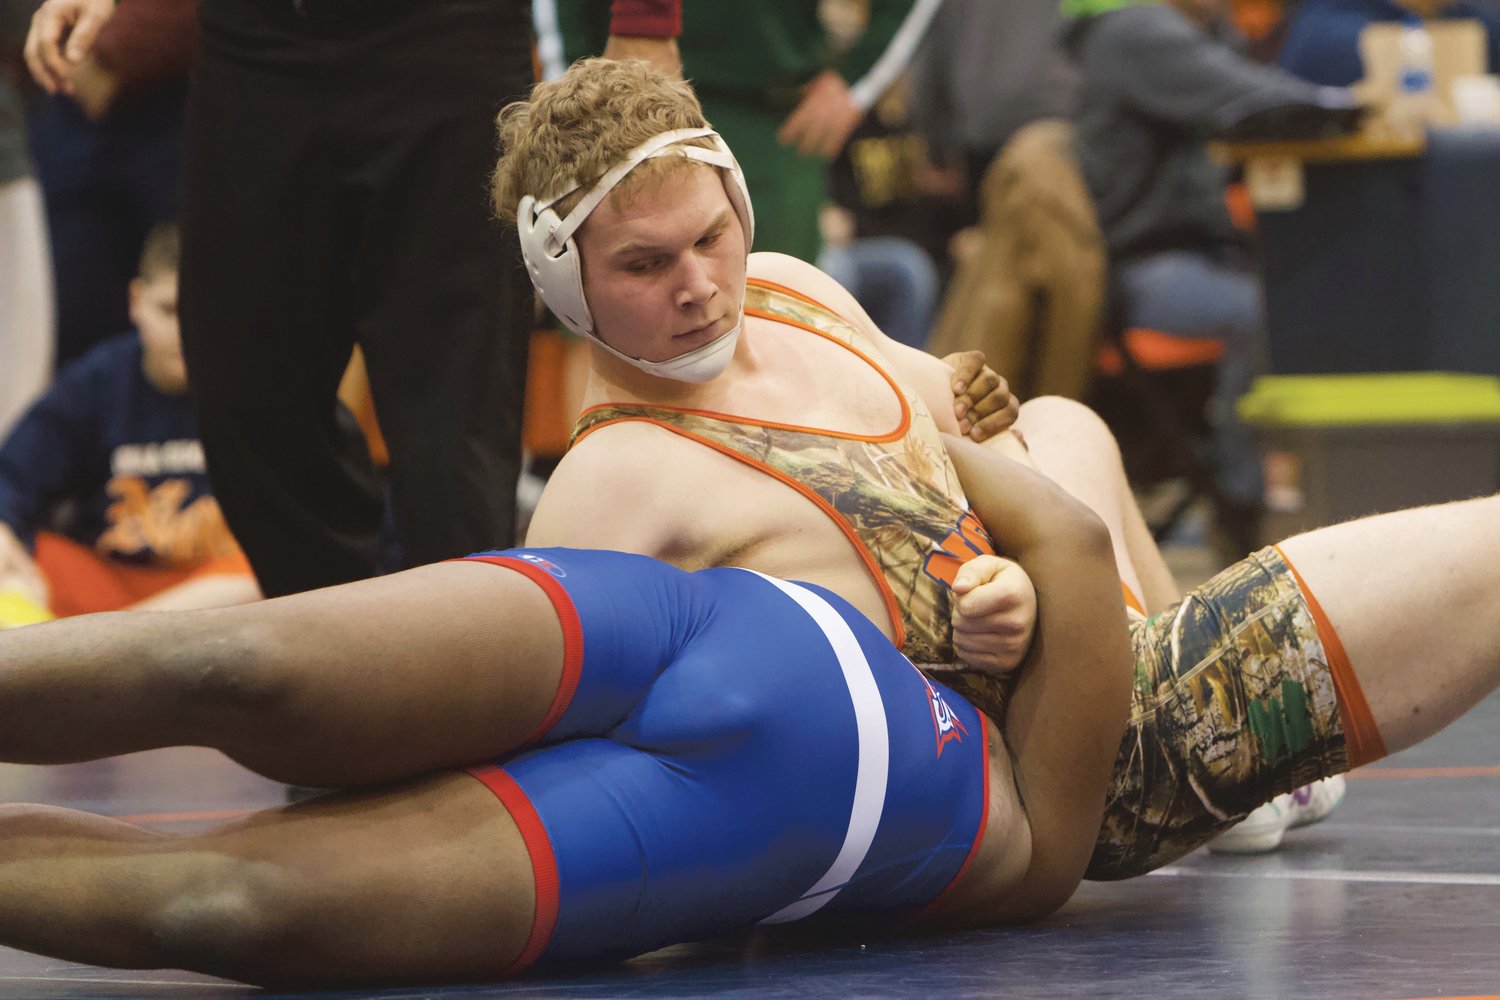 North Montgomery's Drew Webster continued his dominance on Saturday. The senior remained undefeated on the season and defended his 220 pound regional title with a trio of first period falls.